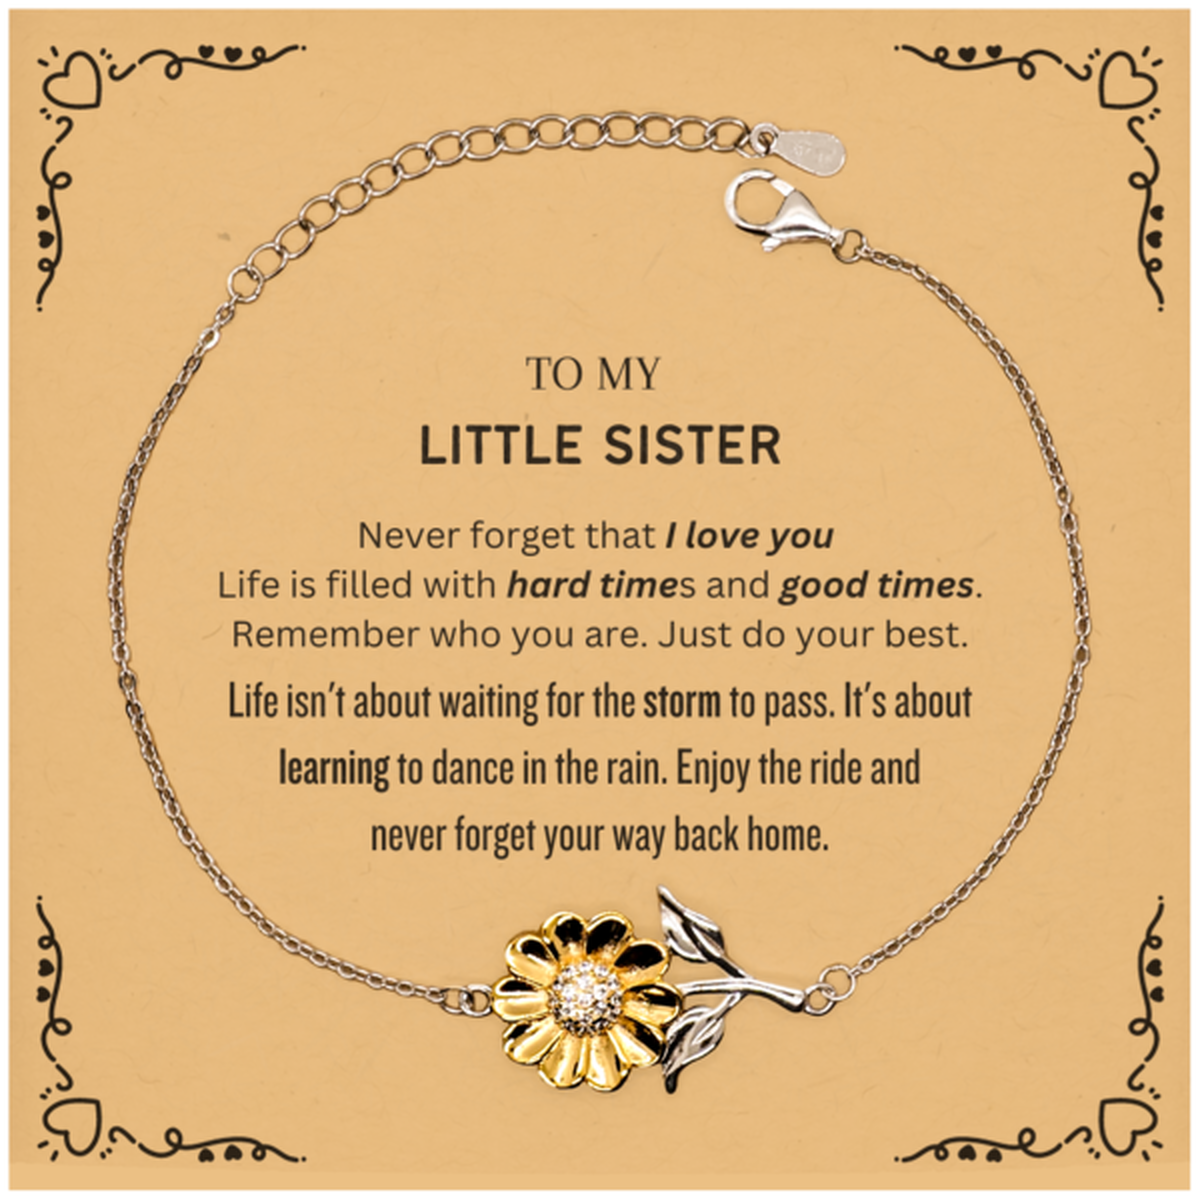 Christmas Little Sister Sunflower Bracelet Gifts, To My Little Sister Birthday Thank You Gifts For Little Sister, Graduation Unique Gifts For Little Sister To My Little Sister Never forget that I love you life is filled with hard times and good times. Rem